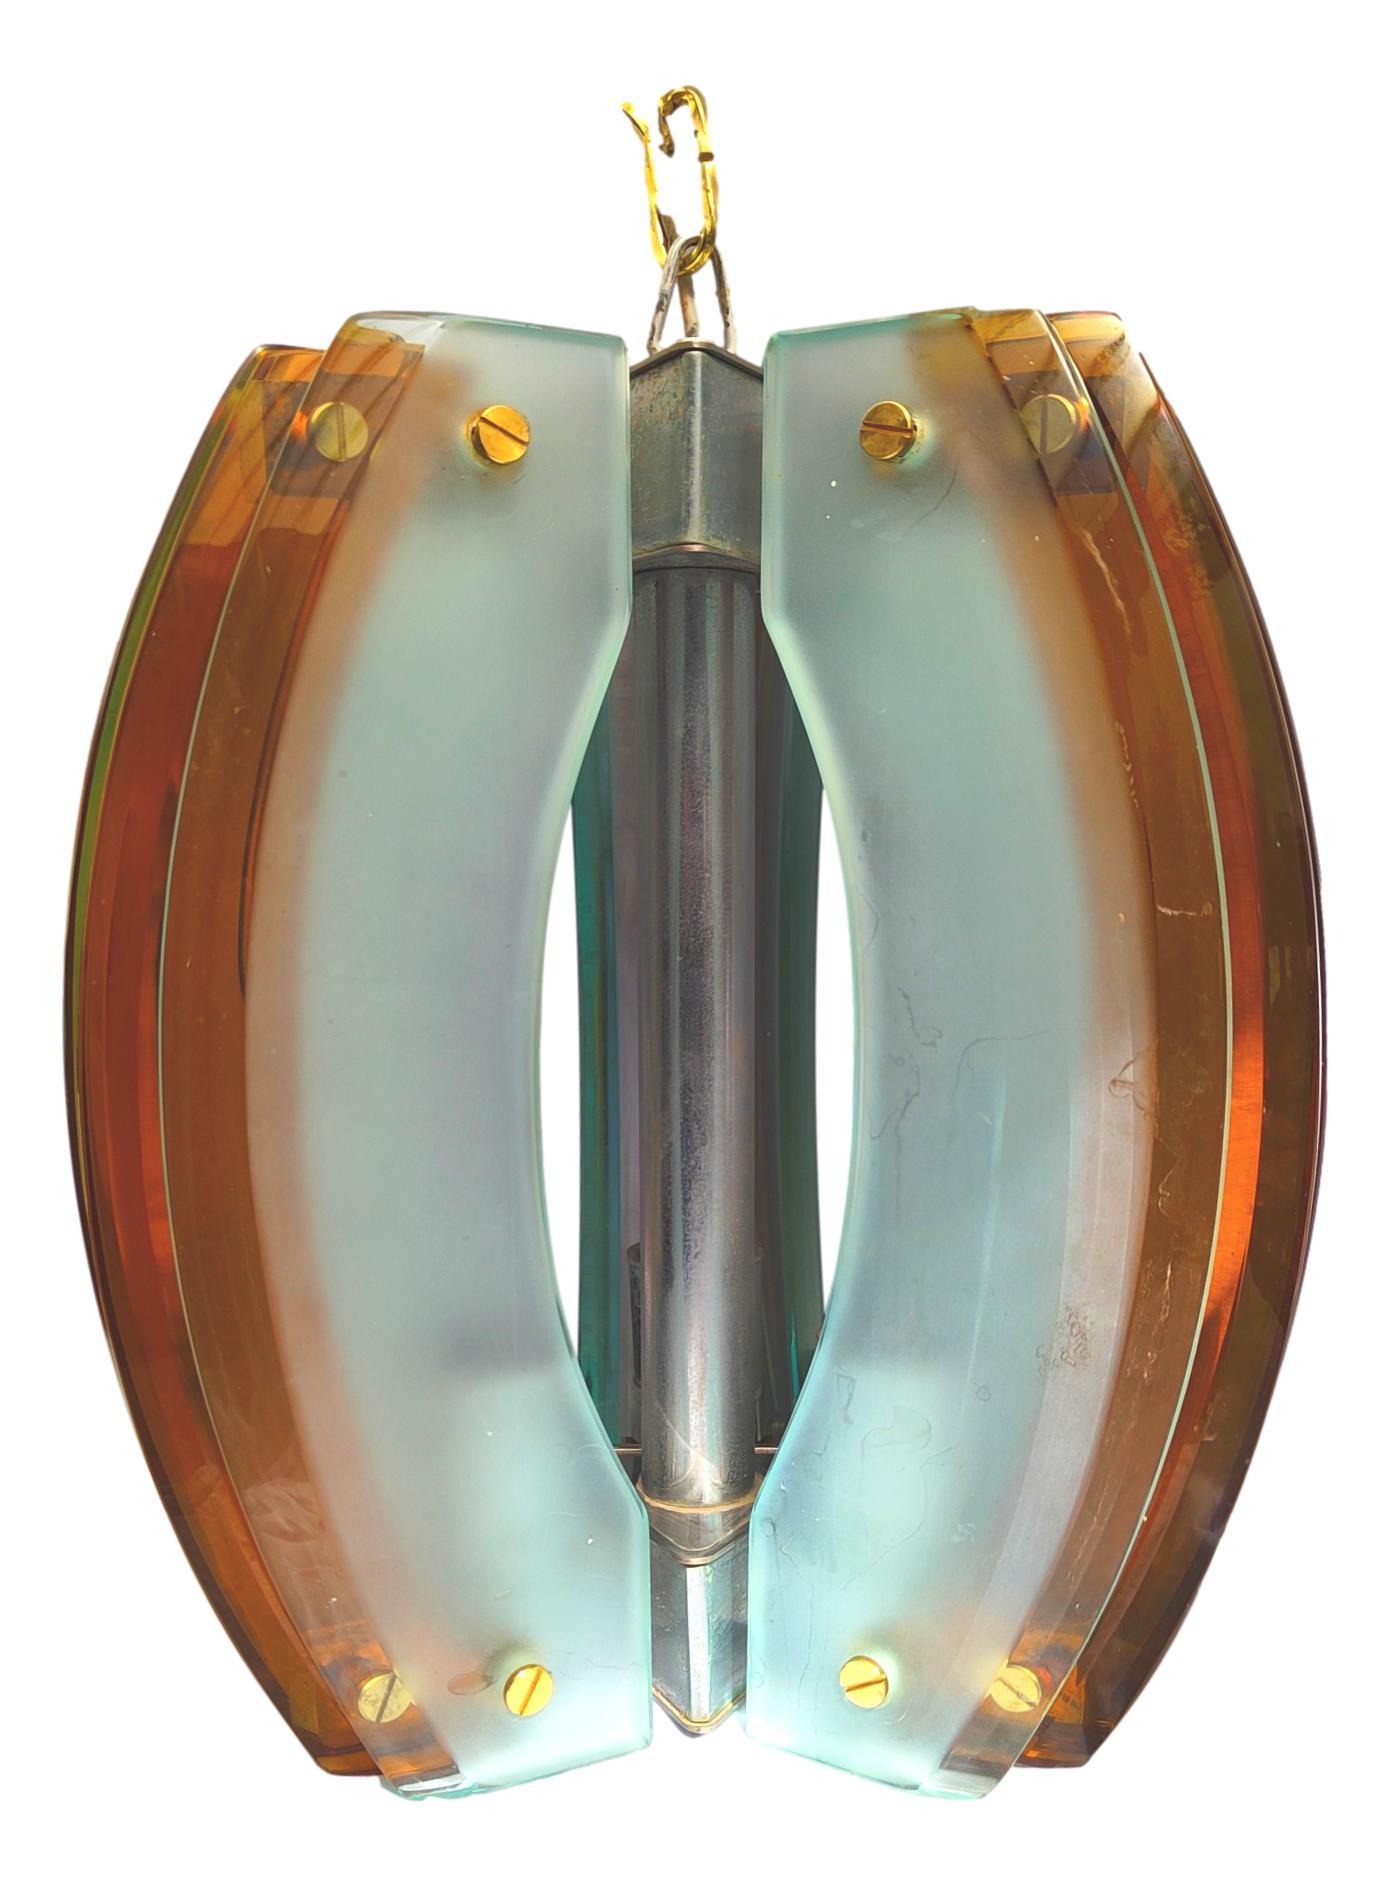 splendid Italian chandelier from the 1970s, made in the style of Fontana Arte and Max Ingrand, in thick murano glass, amber in color and transparent satin, equipped with three lamp holders positioned in the three parts of which it is composed.
Brass